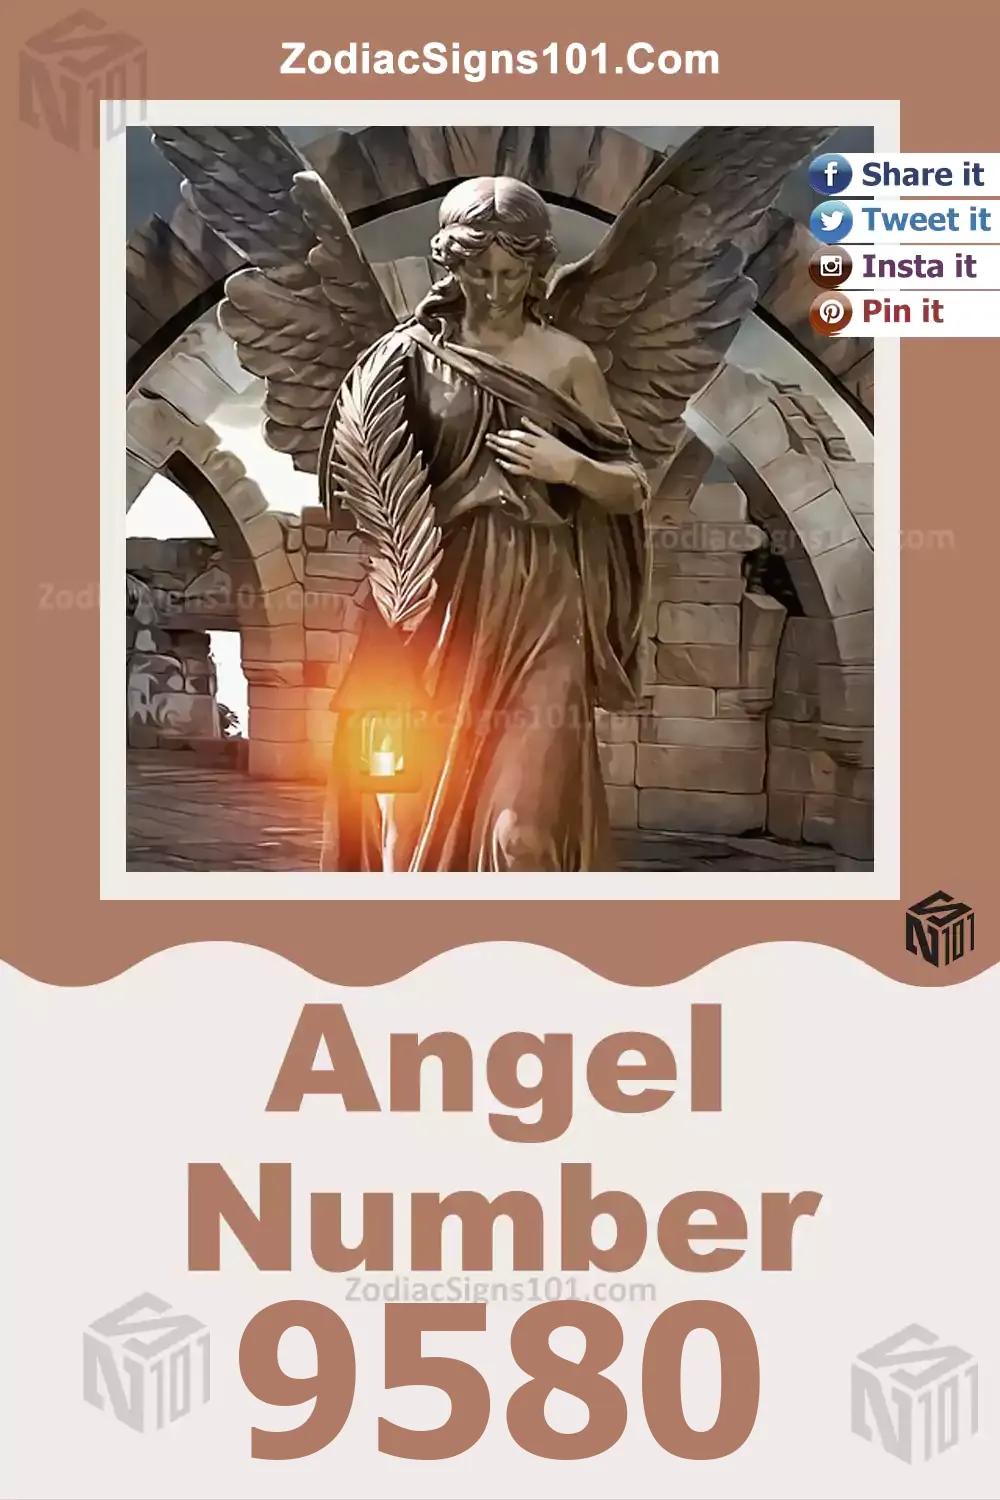 9580 Angel Number Meaning